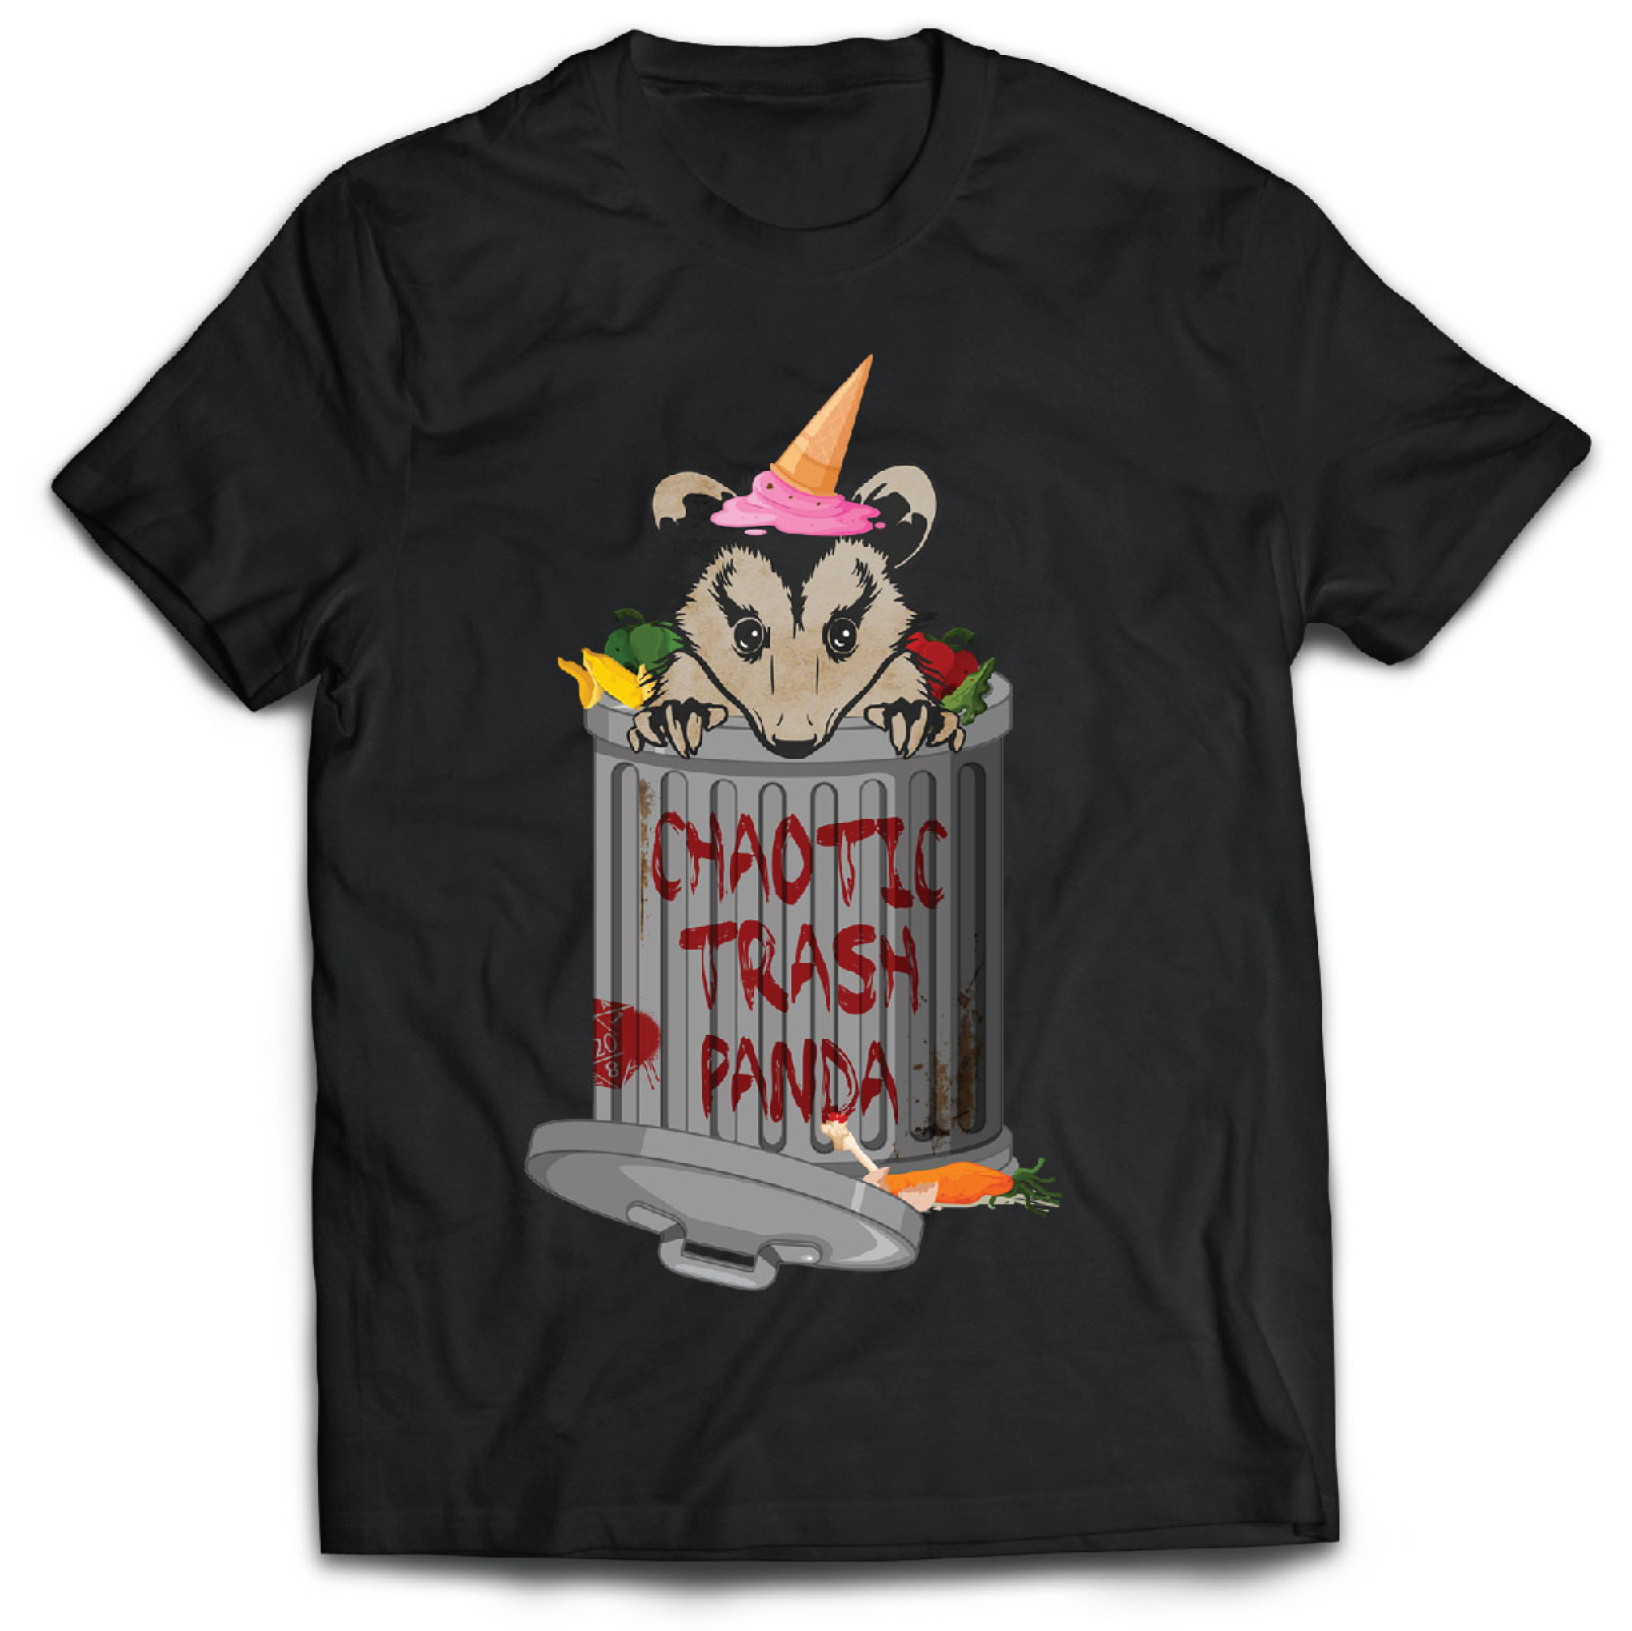 Black D&D T-Shirt featuring a racoon in a trash can surrounded by thrown out food with the words 